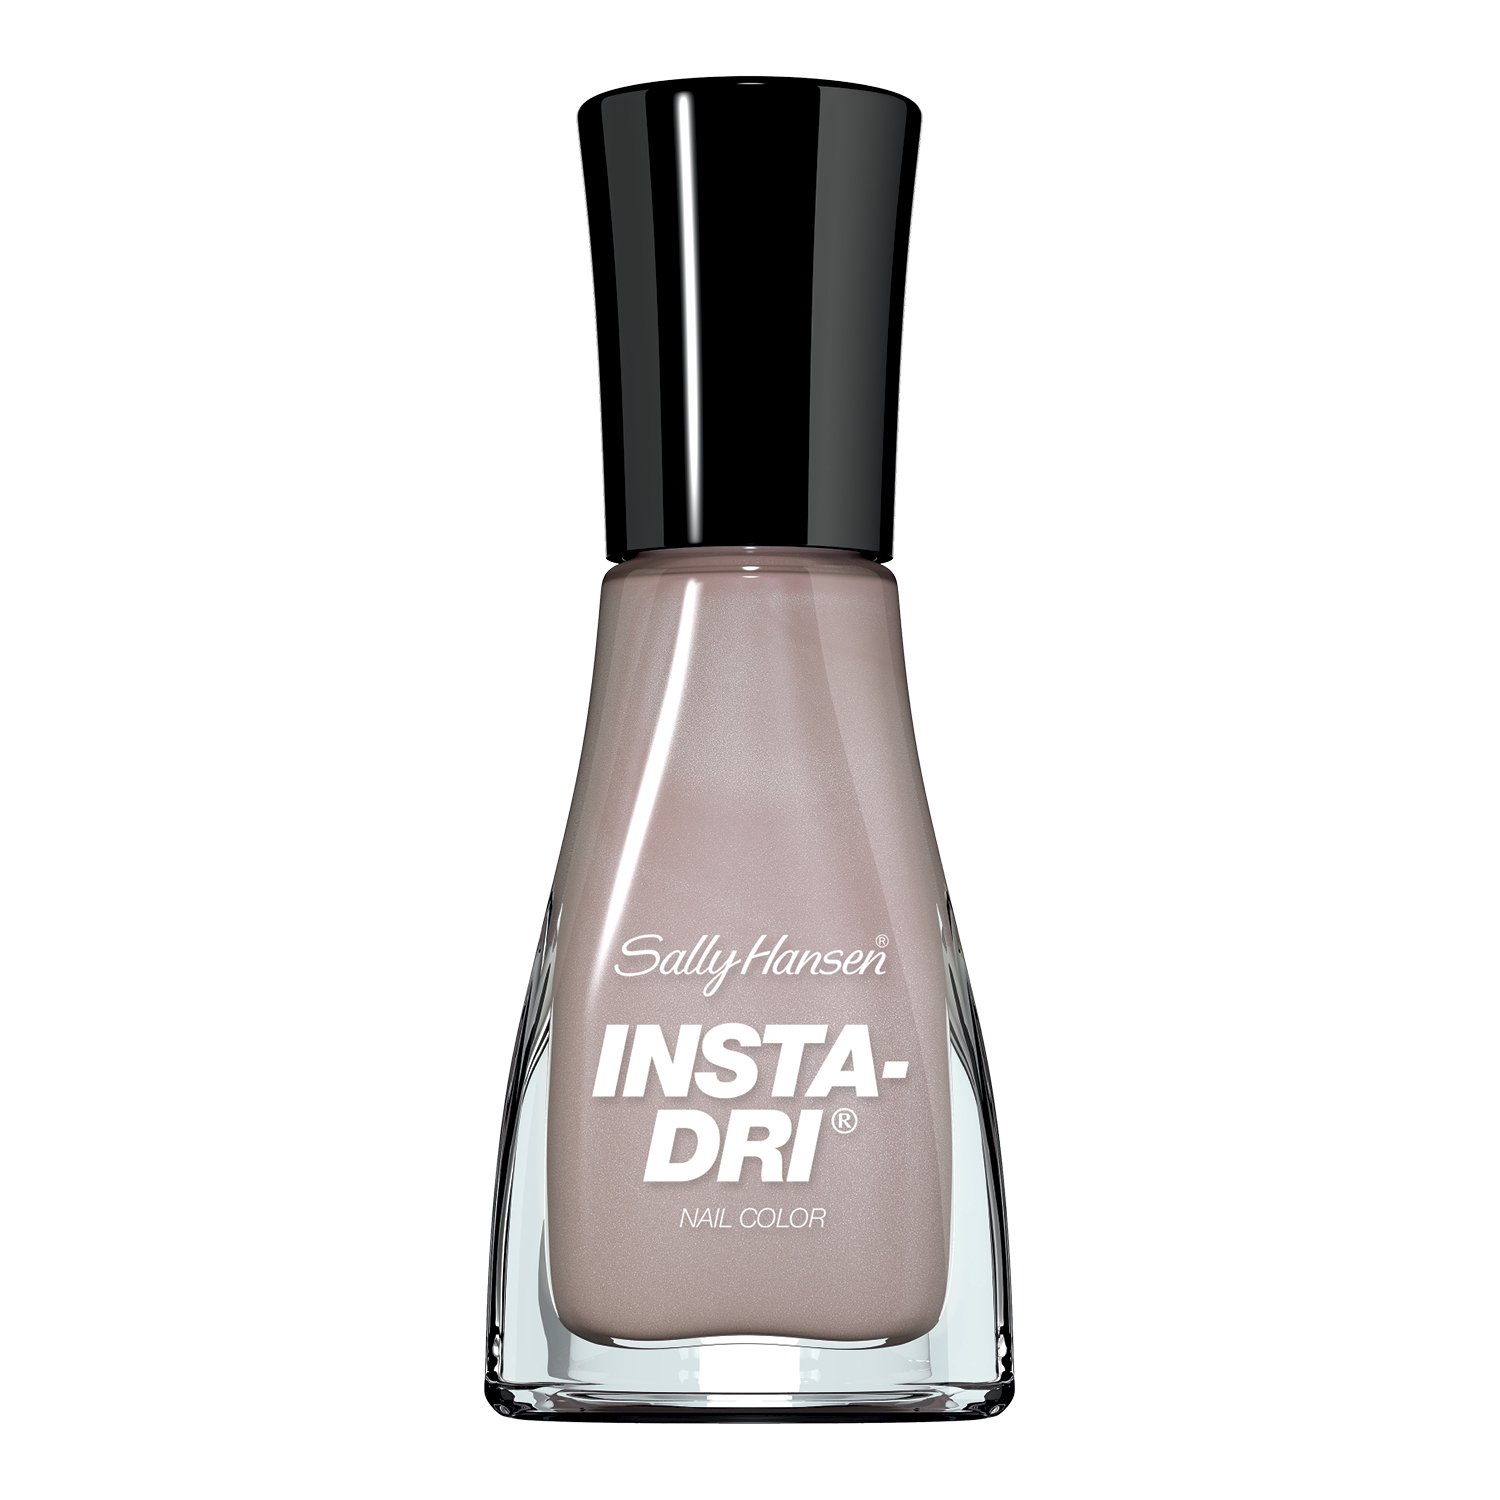 Sally Hansen Insta-Dri Fast-Dry Nail Color, Nudes Making Mauves - 155 0.31 Fl Oz (Pack of 1)